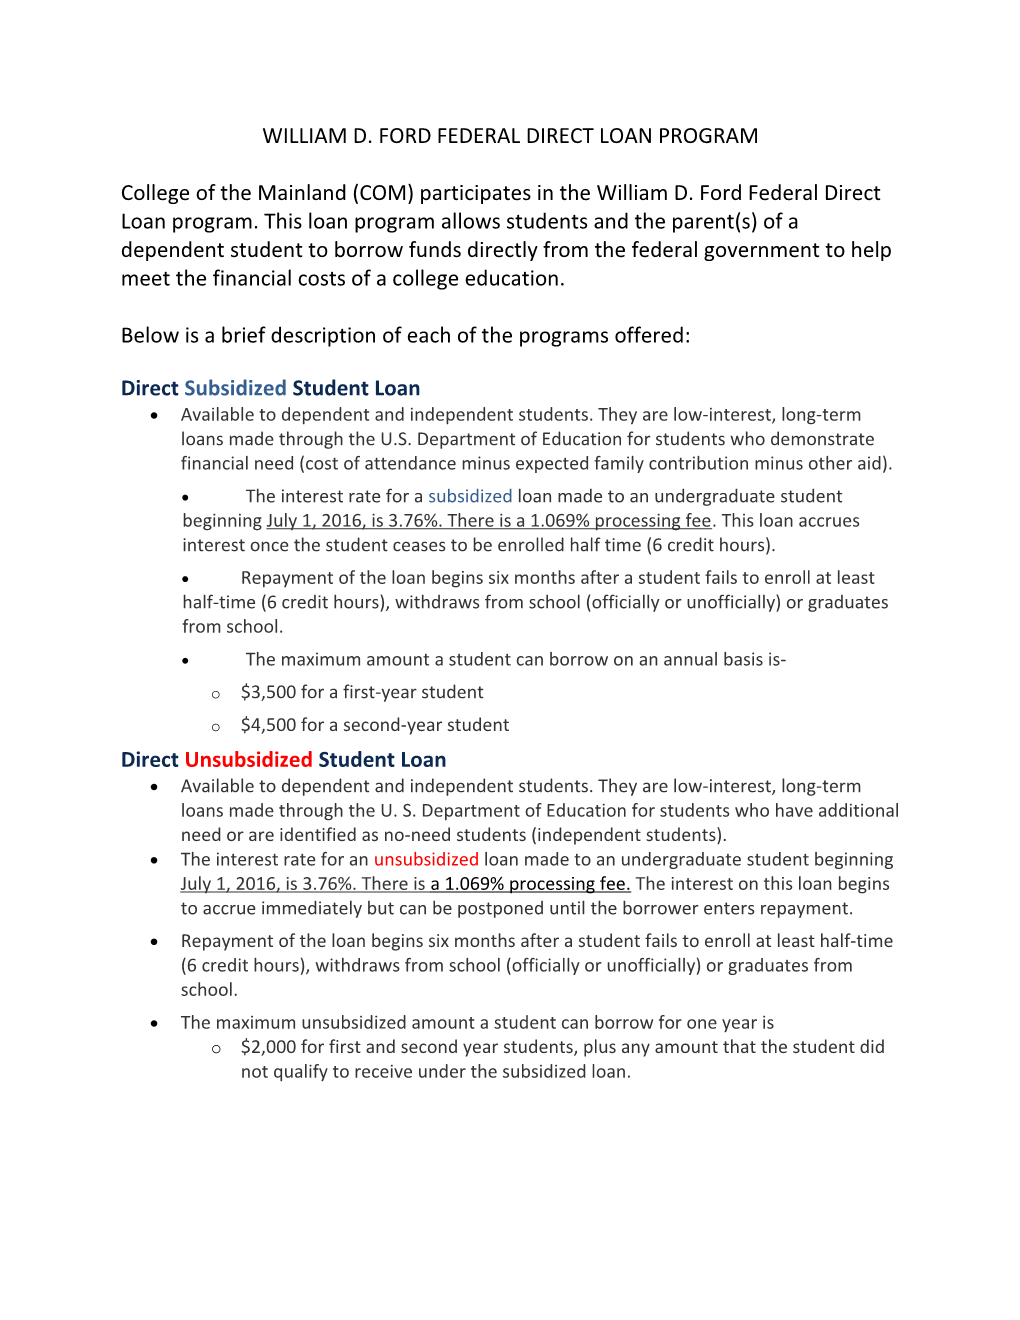 William D. Ford Federal Direct Loan Program